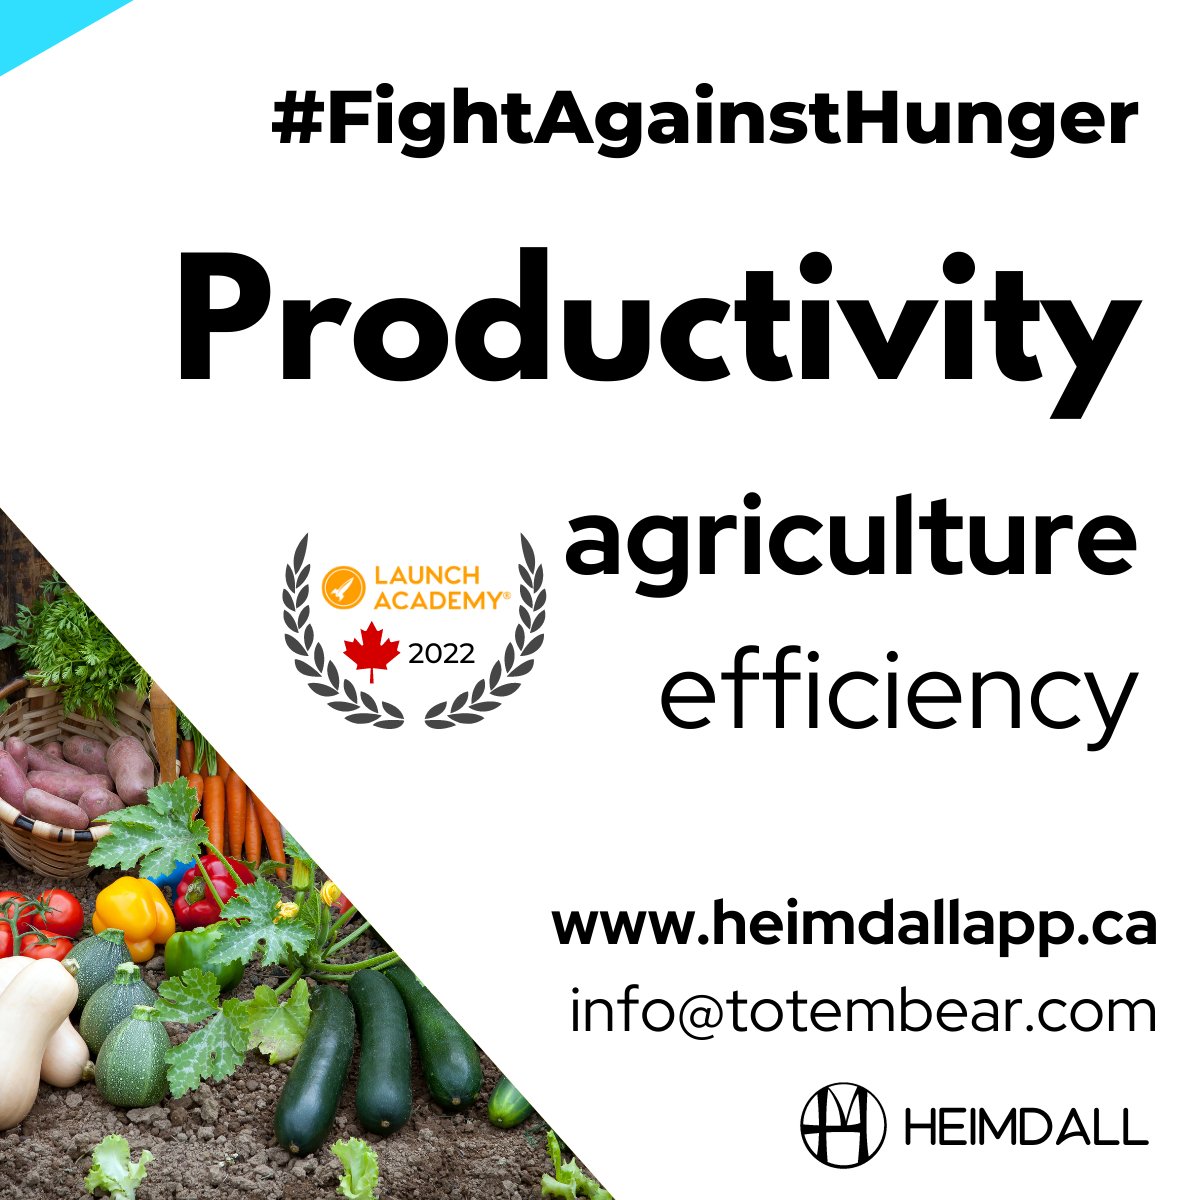 Heimdall's technology can increase productivity and efficiency in agriculture, helping fight world hunger by providing more nutritious and affordable food for communities in need 

#Heimdall #agriculture #FightAgainstHunger #TotemBear #LaunchAcademyHQ #Canada #Vancouver